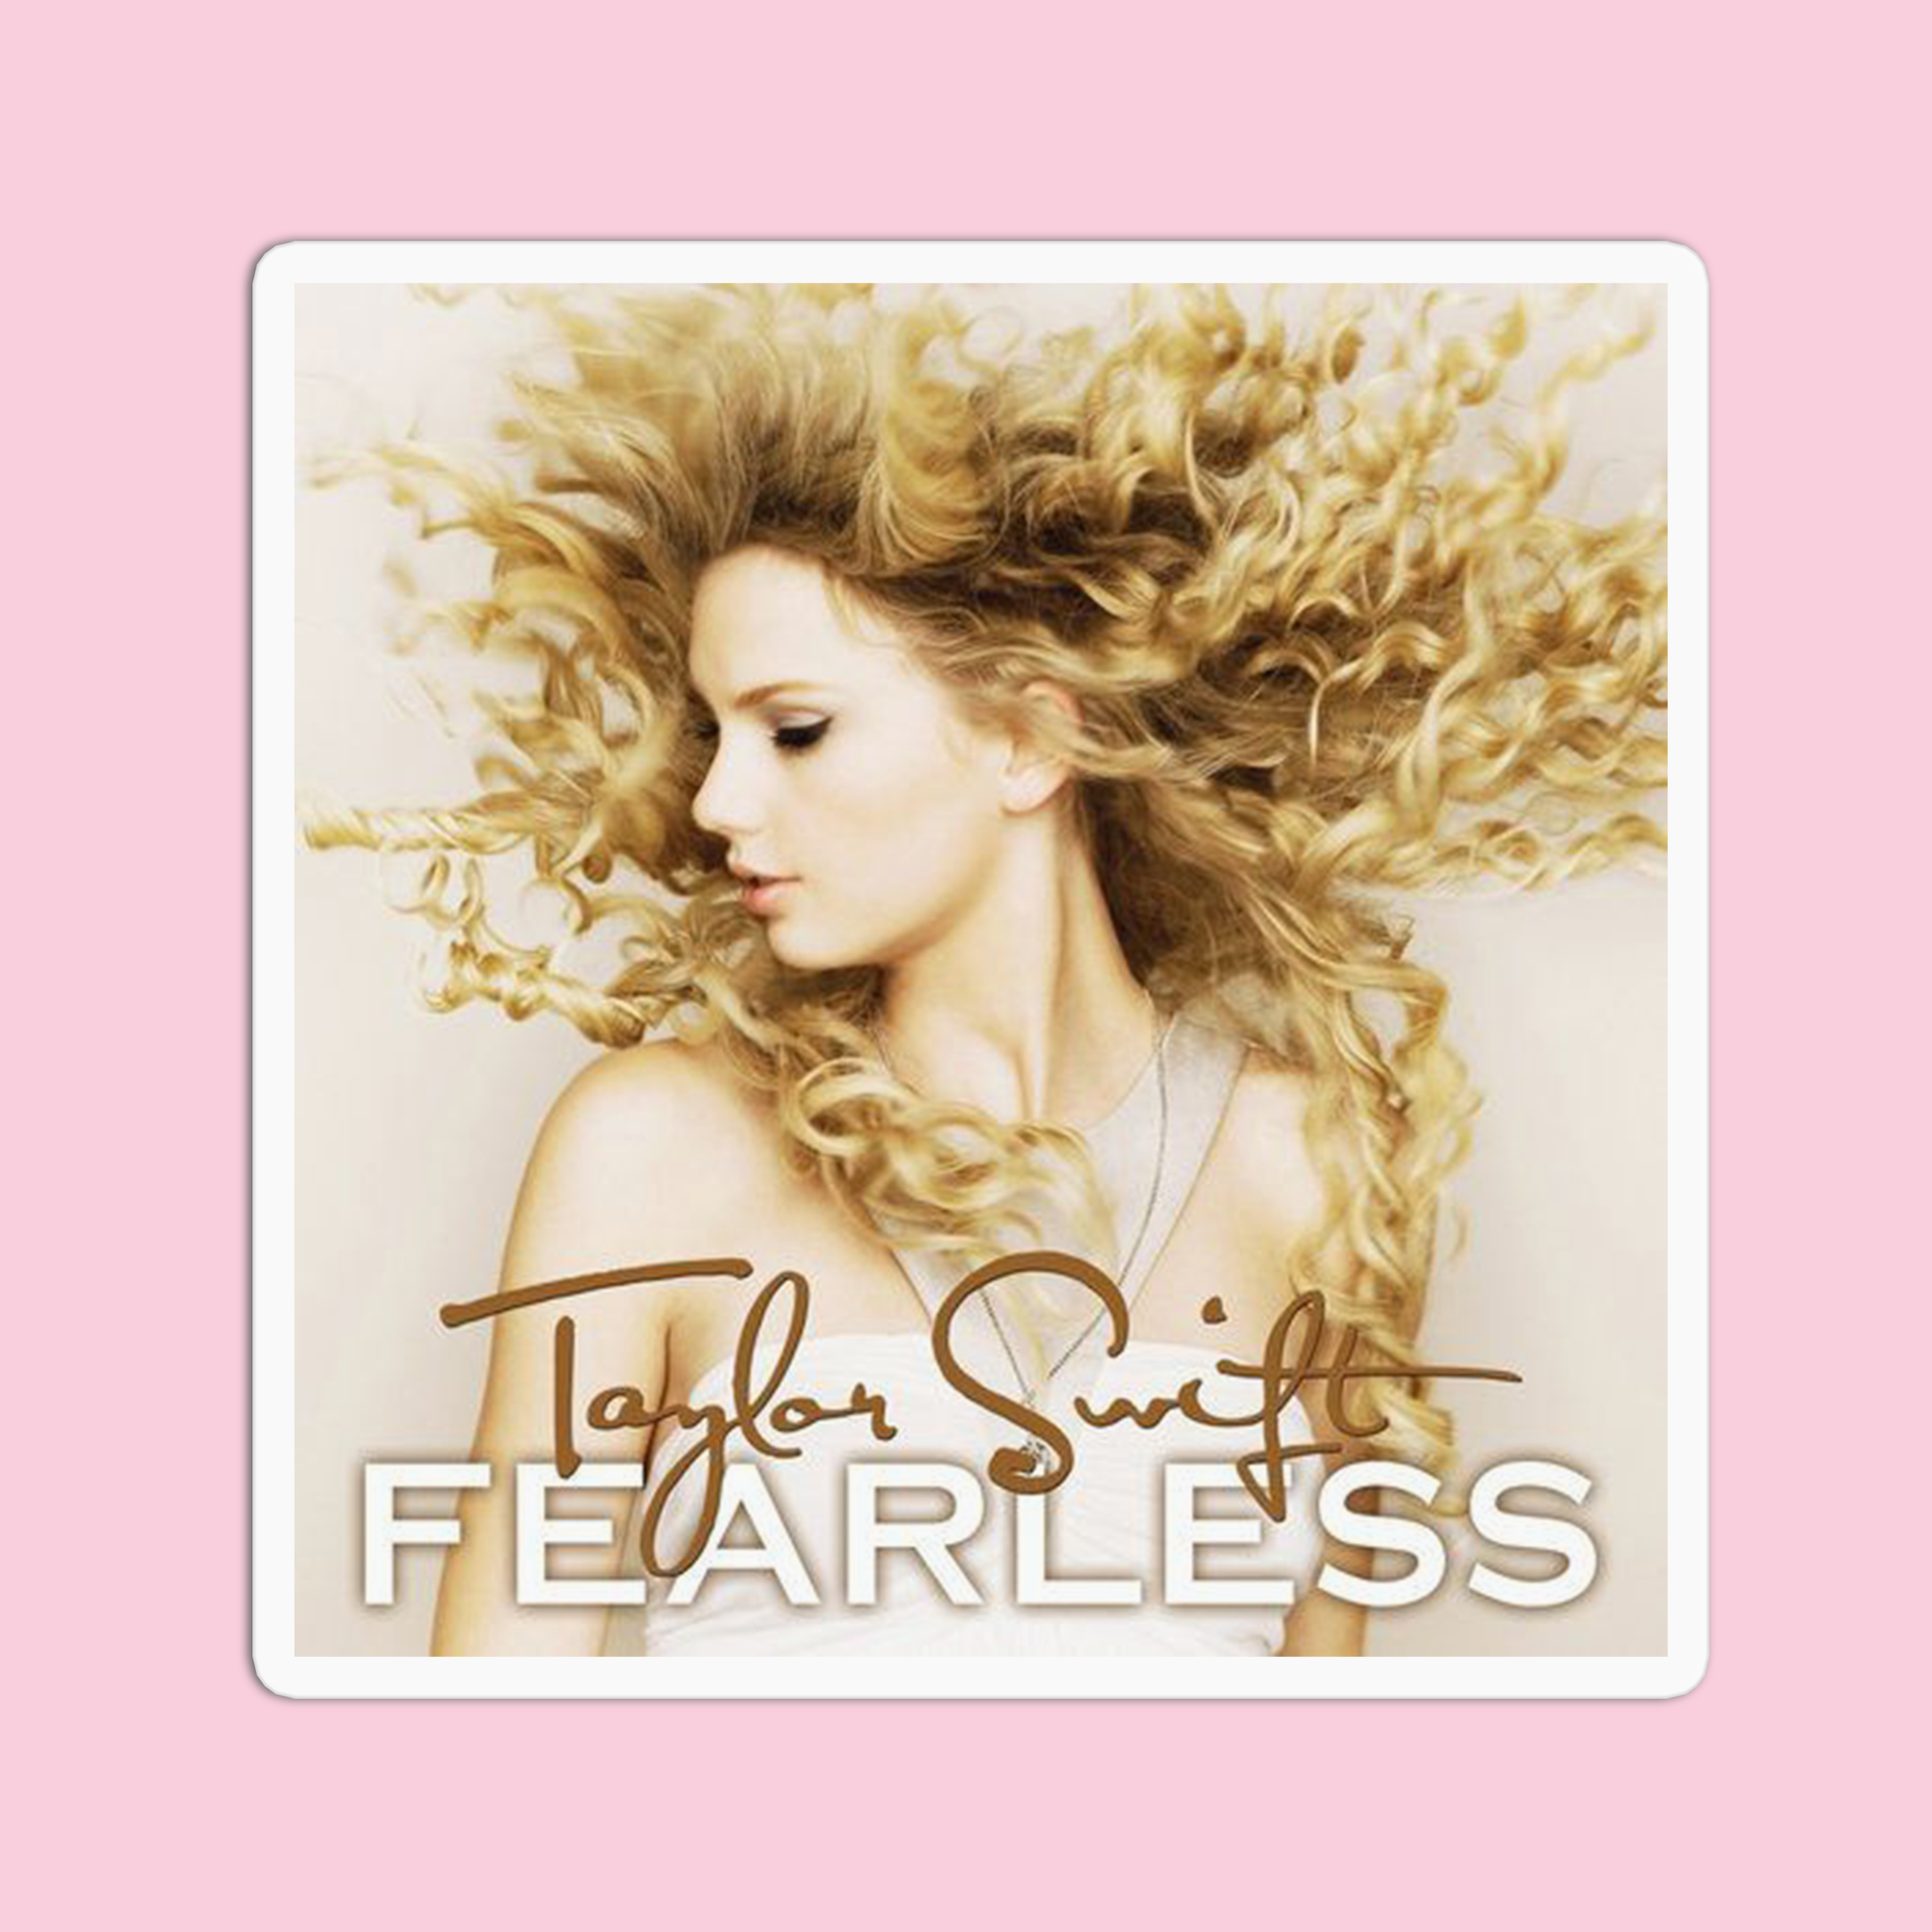 Taylor Swift's Album Covers Through the Years